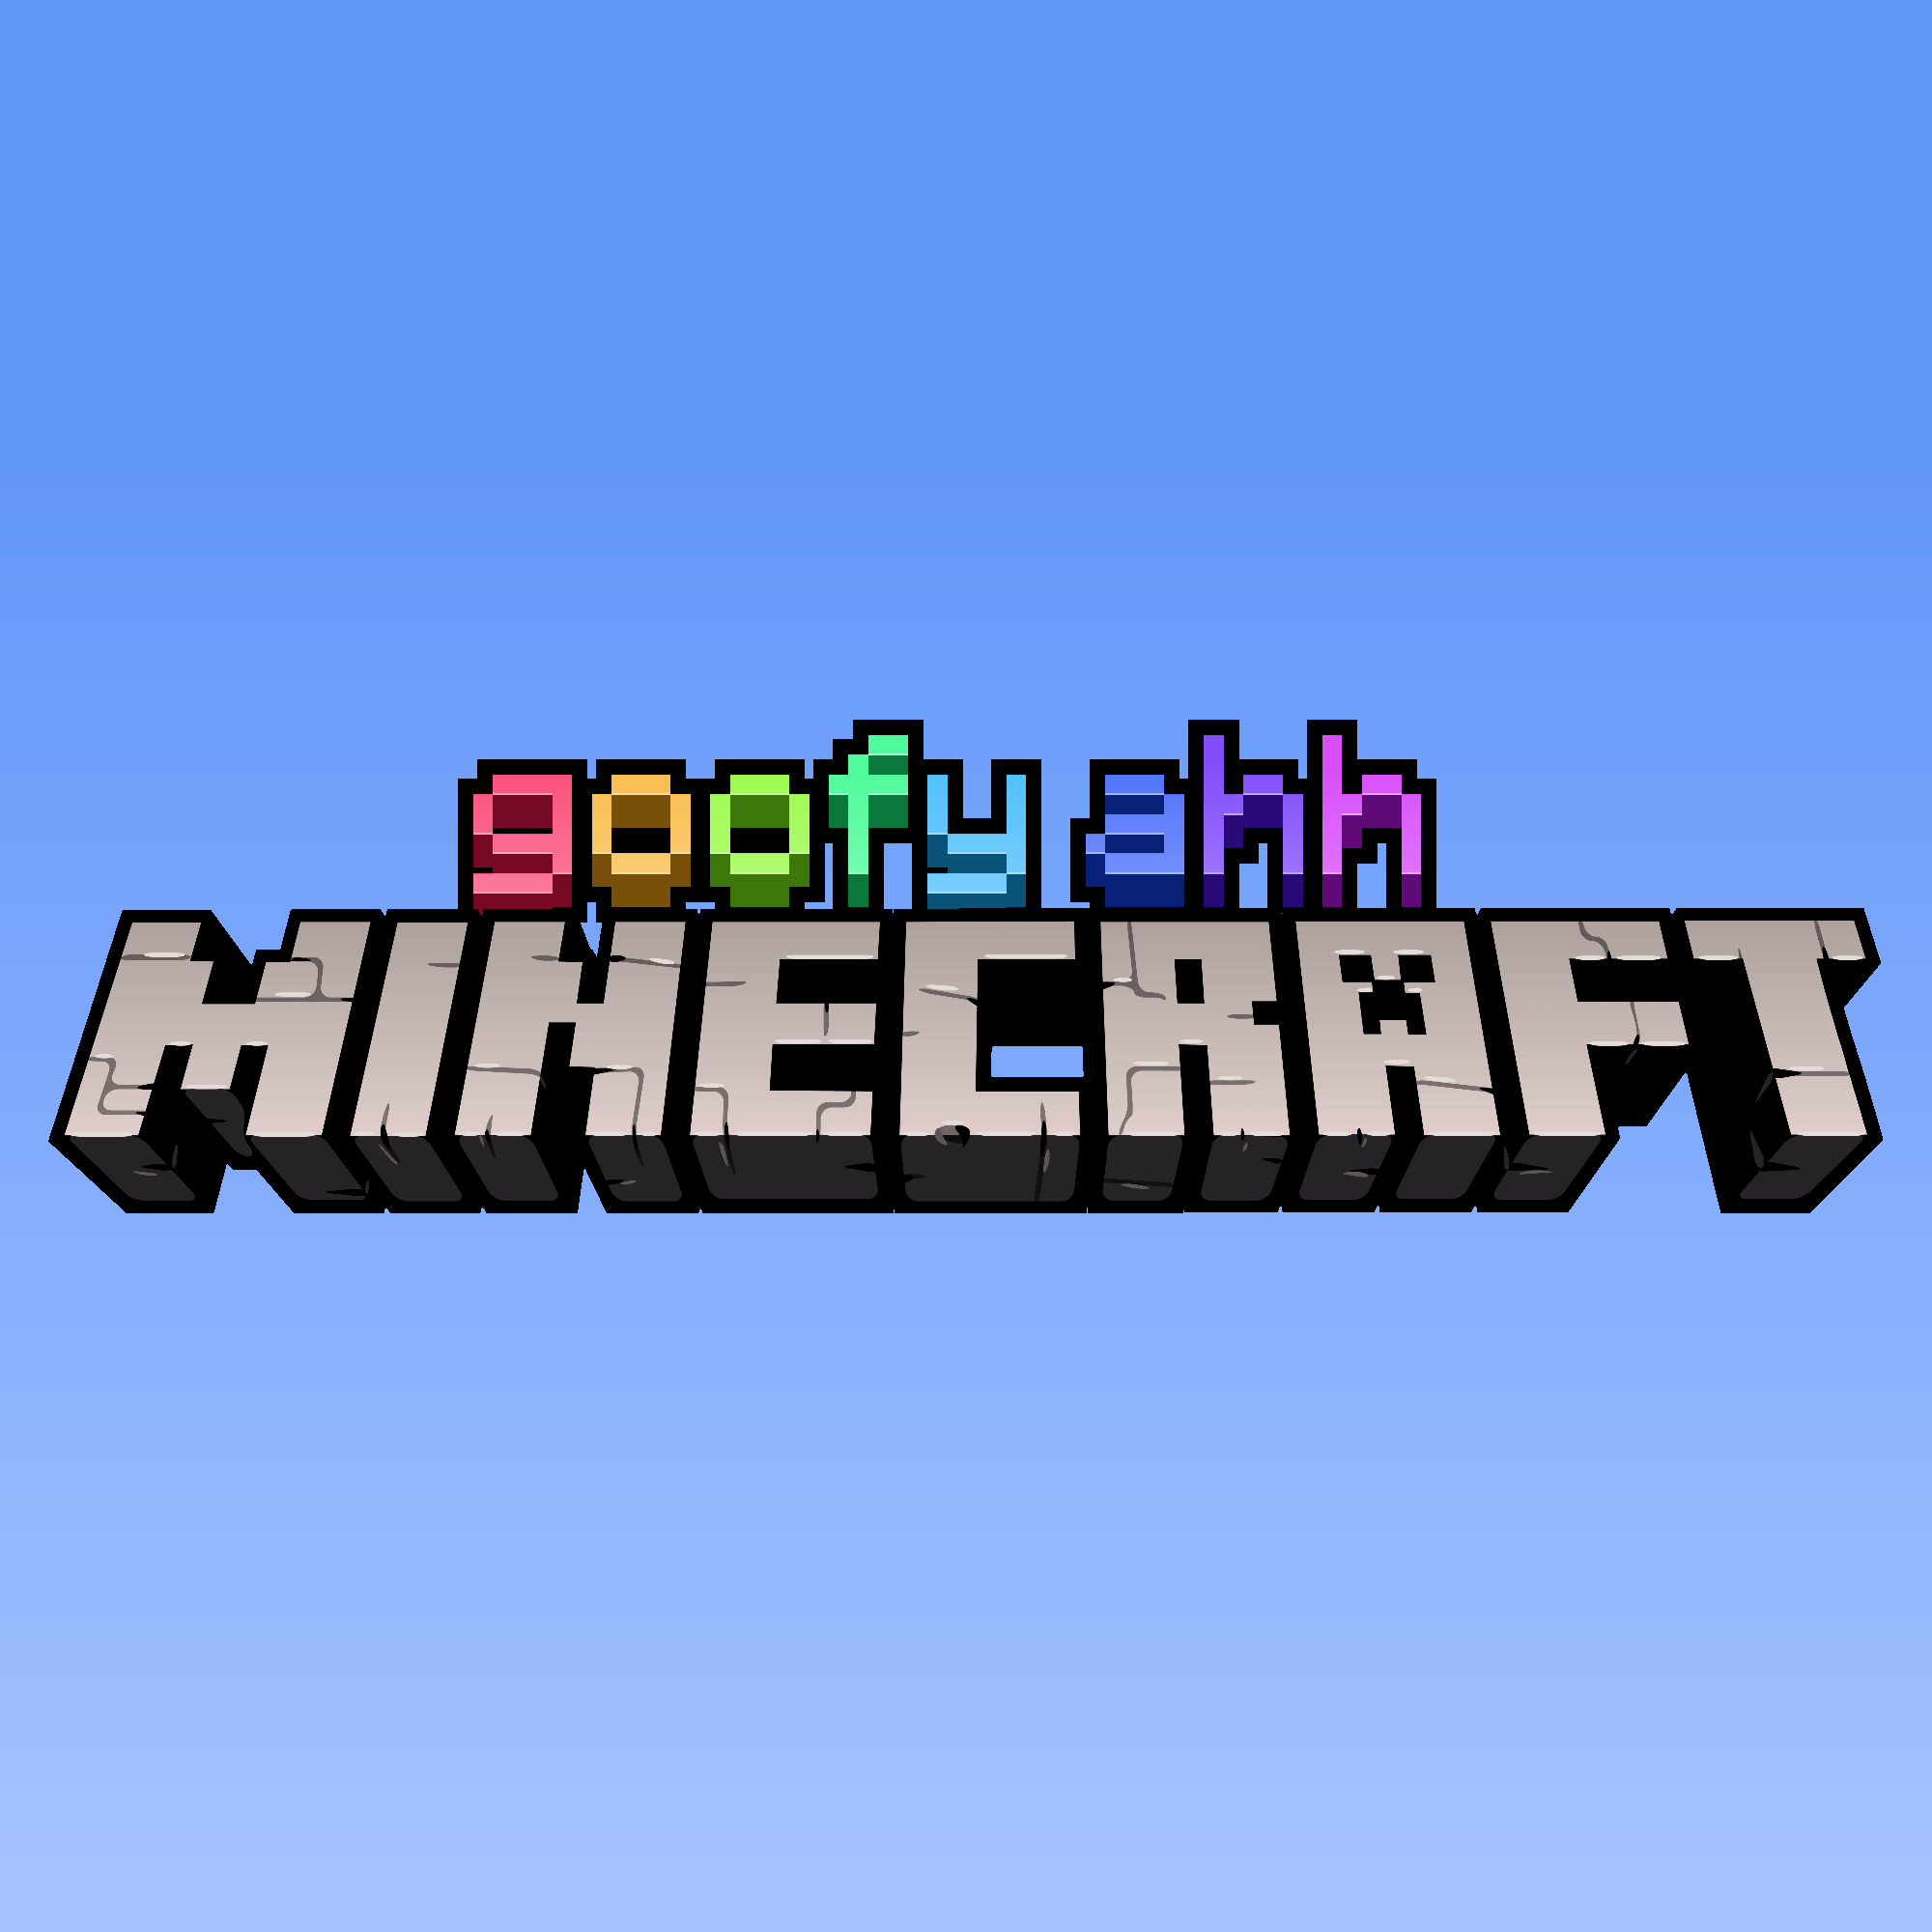 Goofy Ahh Sounds - Minecraft Resource Packs - CurseForge